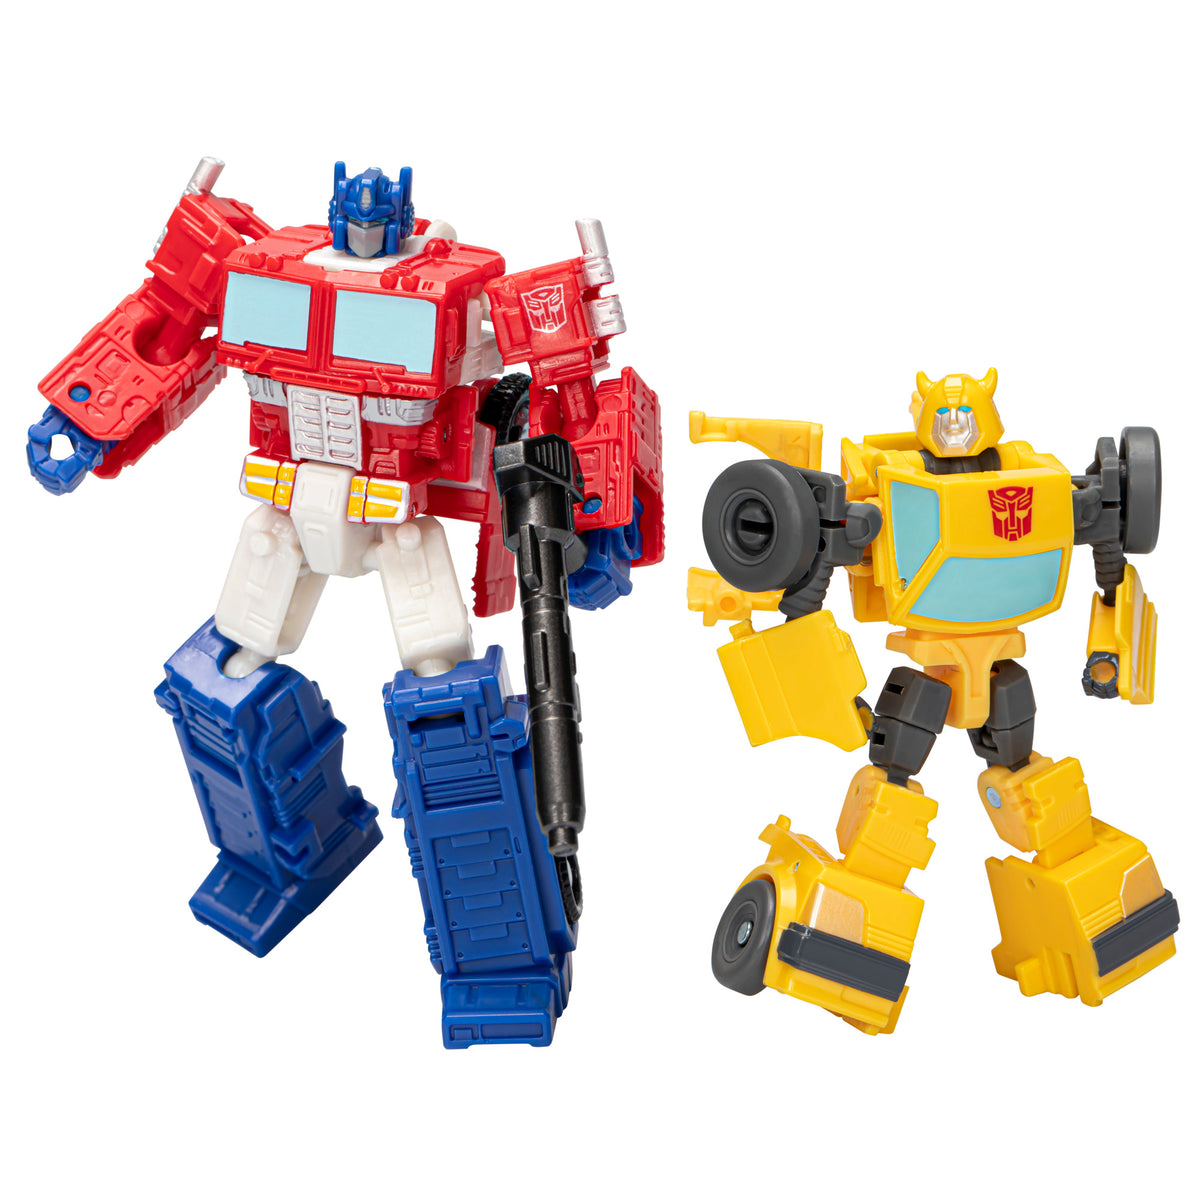 Toy Report: Transformers Prime Bumblebee